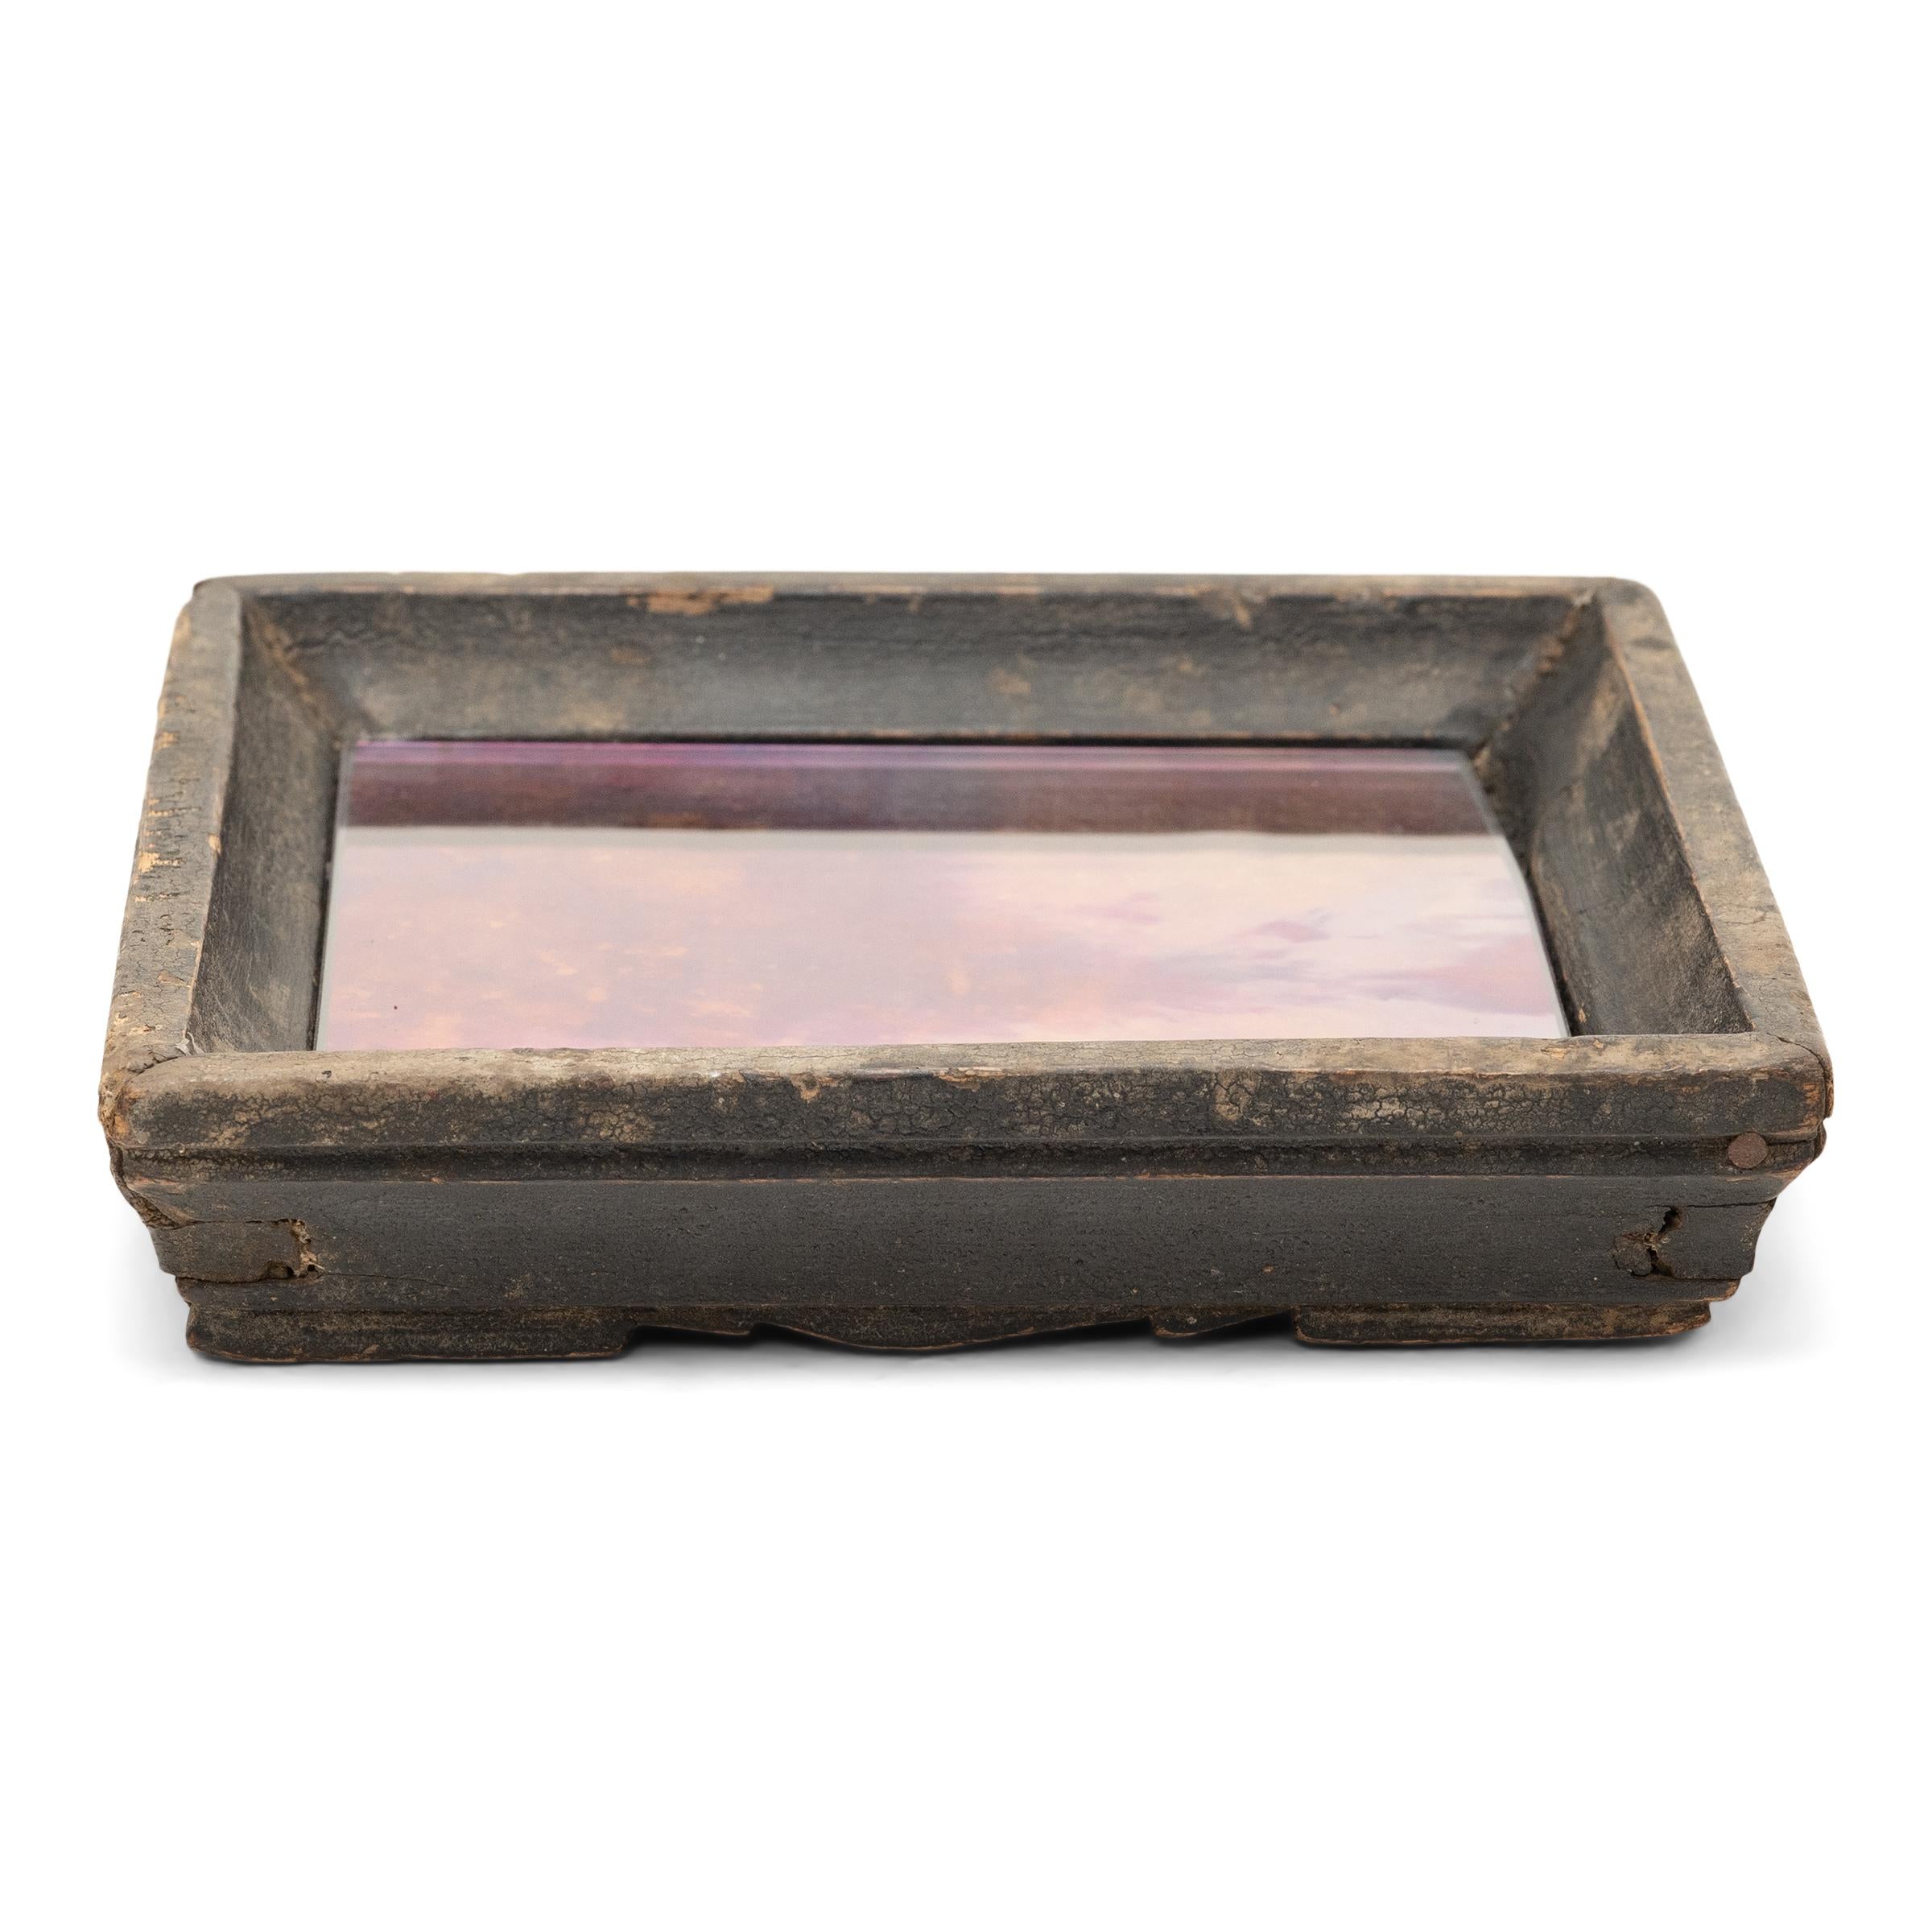 Simple lines, a modest form, and a layer of hand-brushed dark brown lacquer give this petite Qing-dynasty tray a provincial charm that recalls the warmth of home. The square tray has developed great character from years of use serving tea or food to